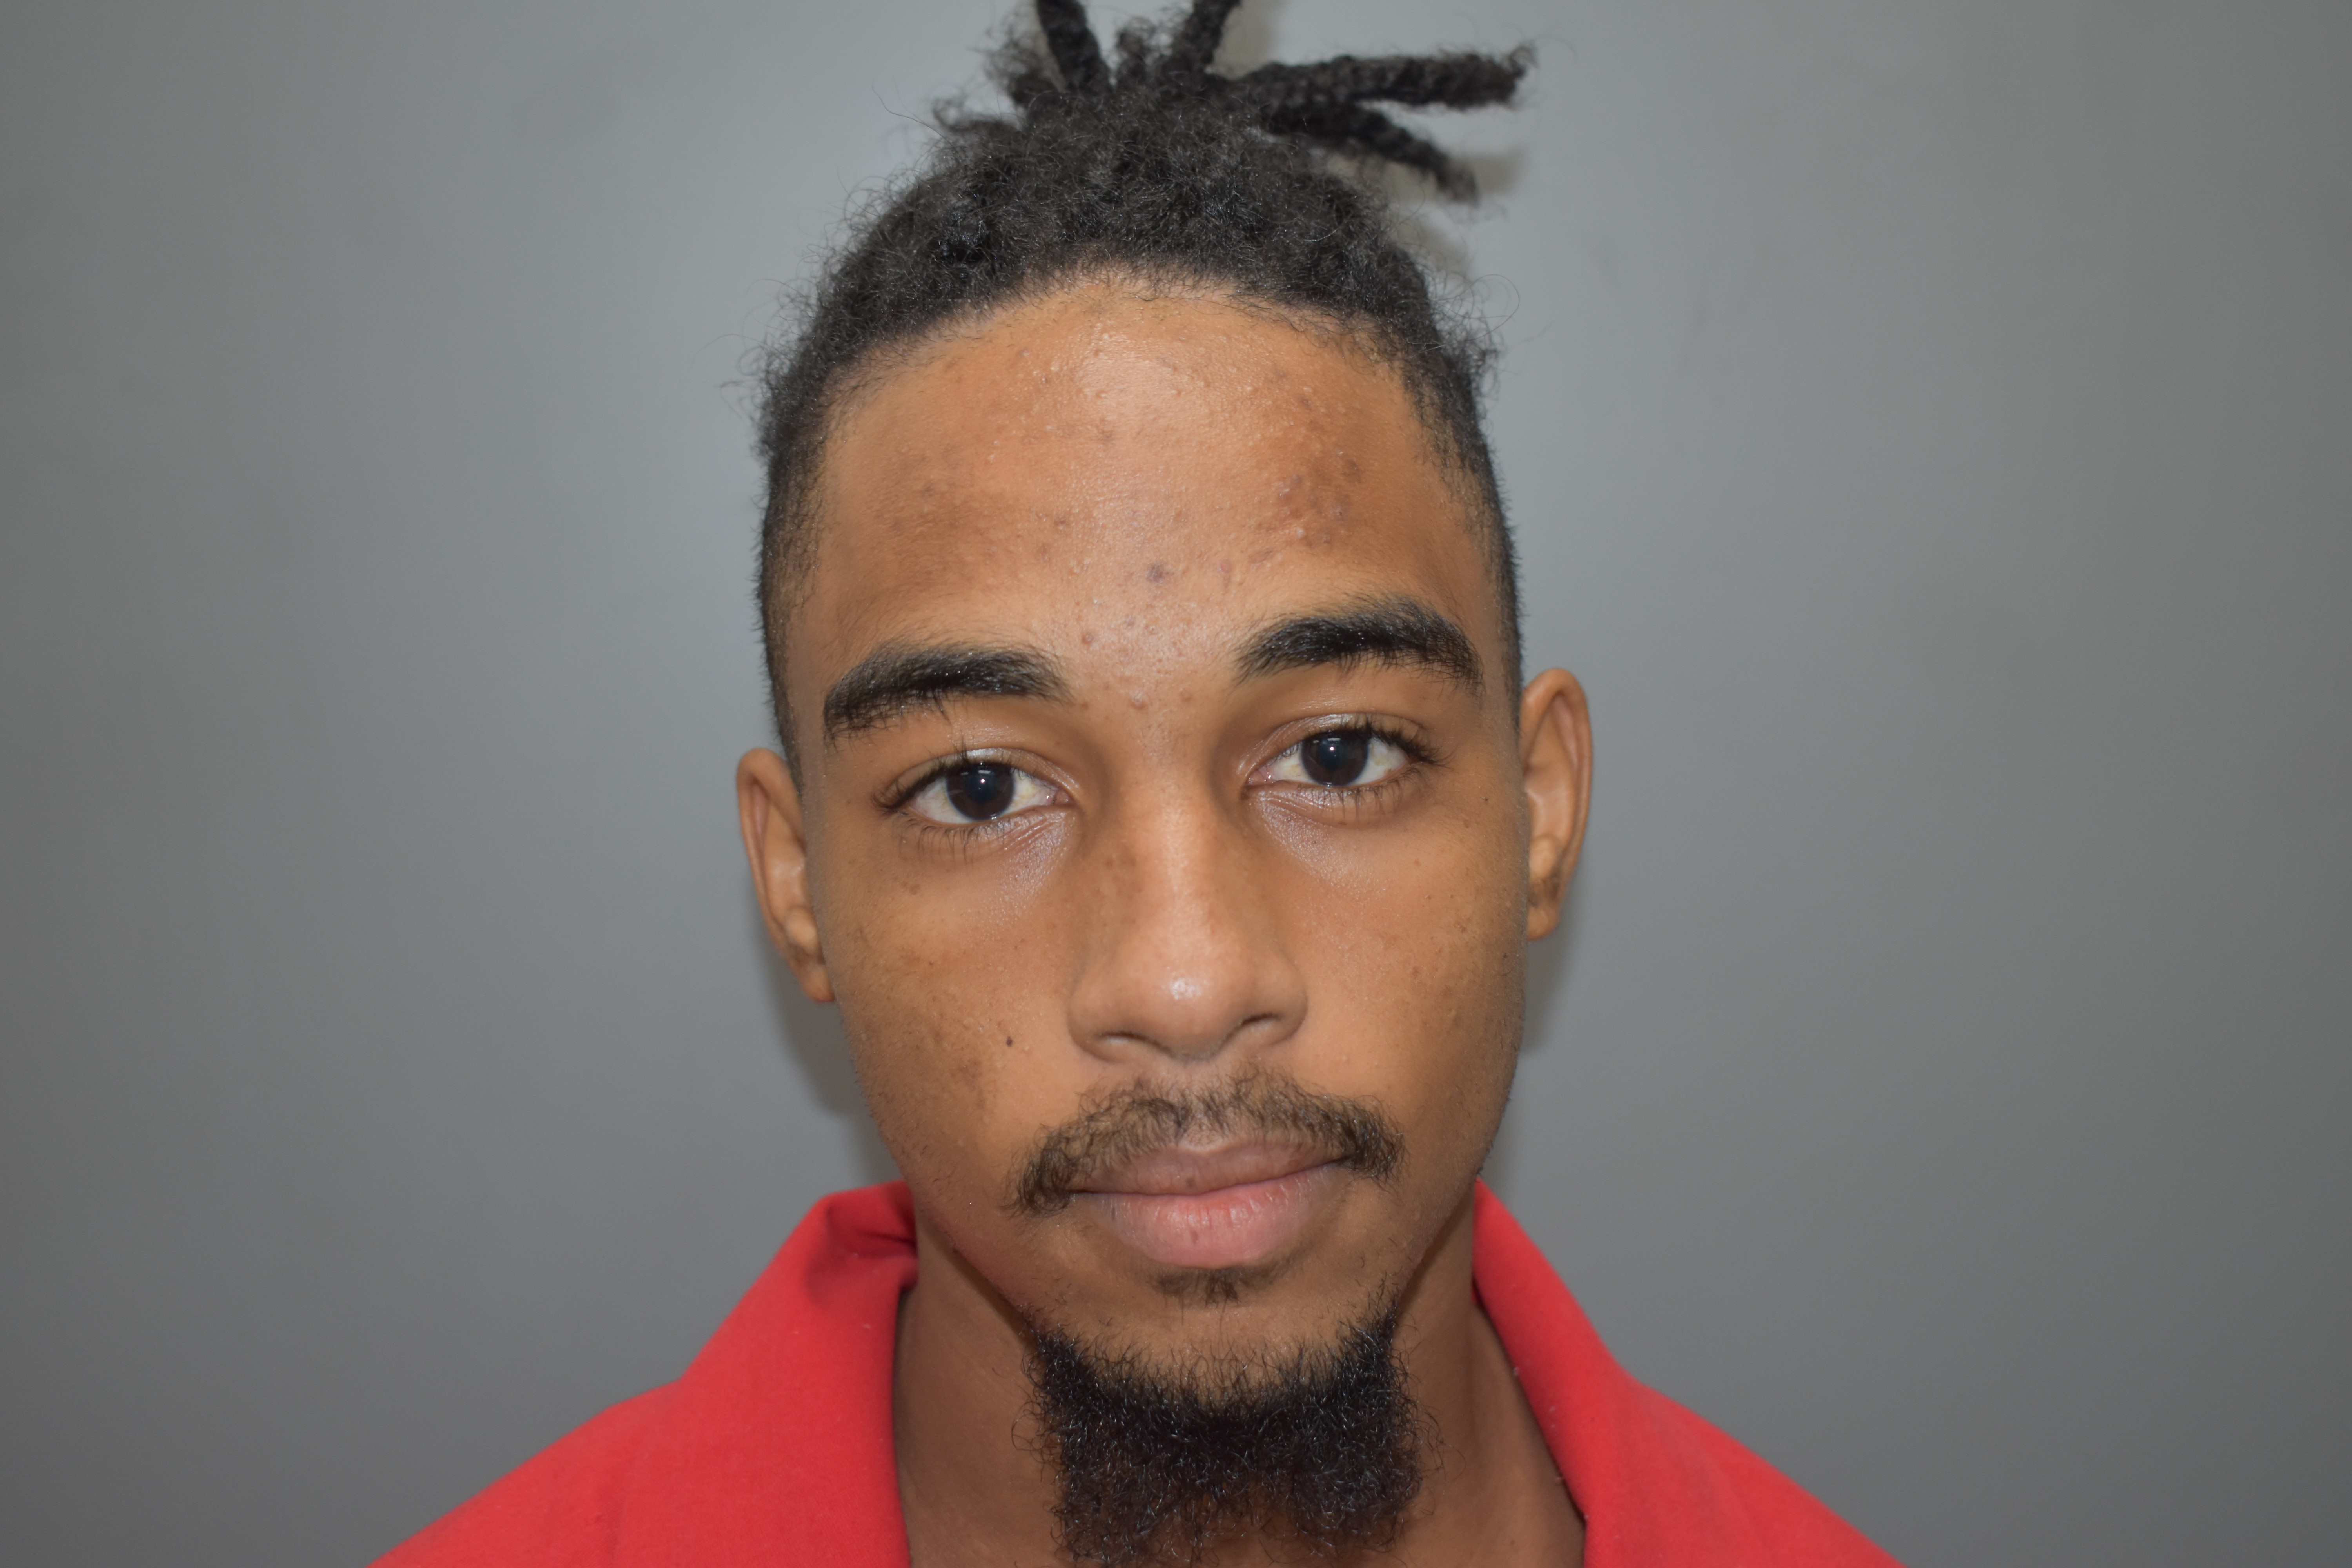 19-Year-Old St. Thomas Man Arrested Twice In Two Weeks On Burglary Charges